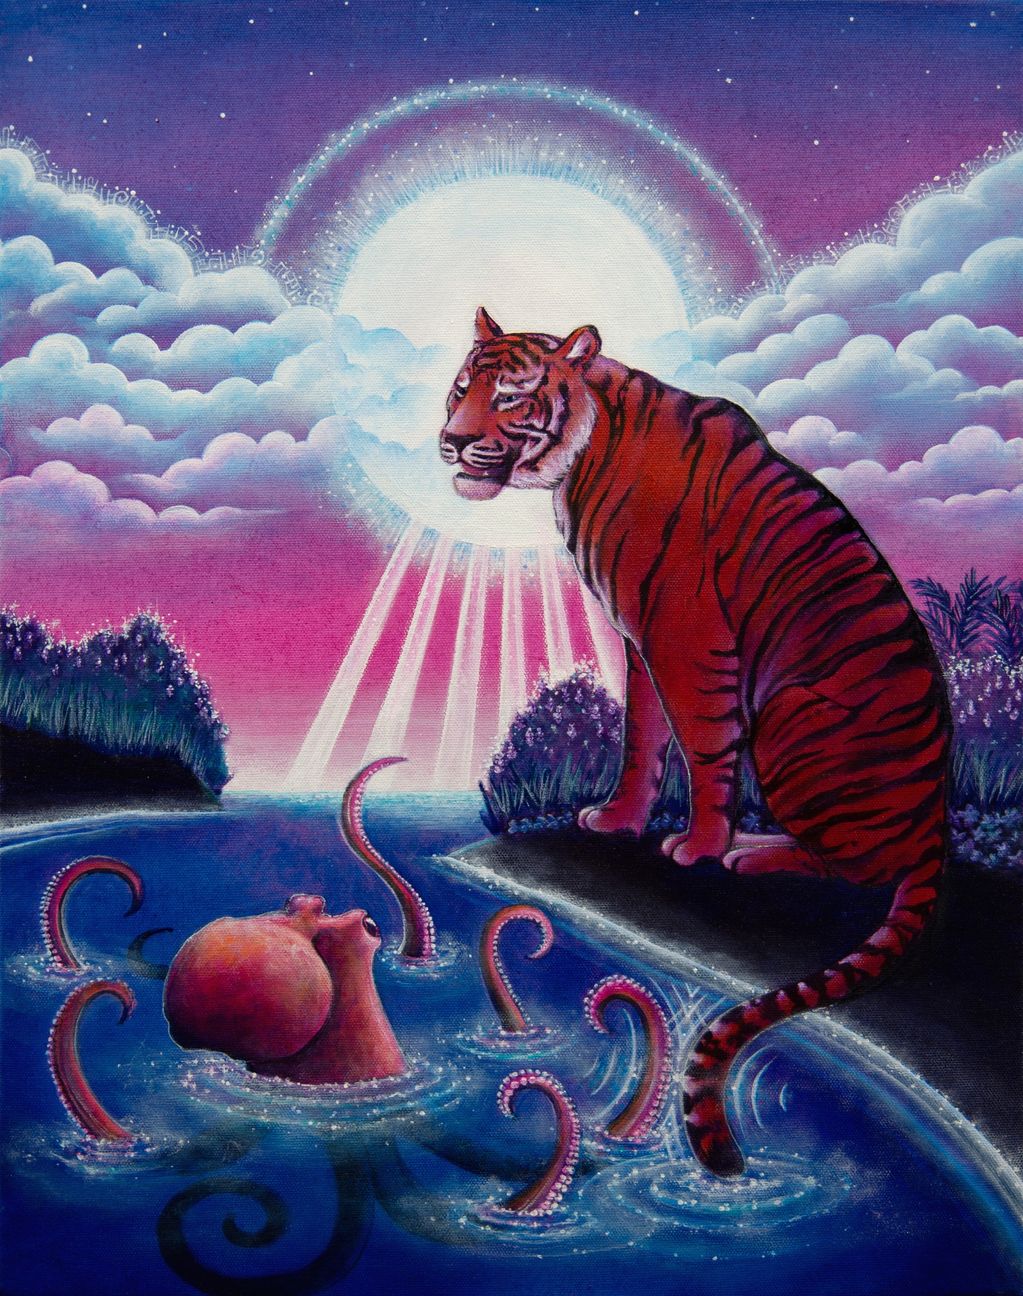 octopus and tiger in front of moon